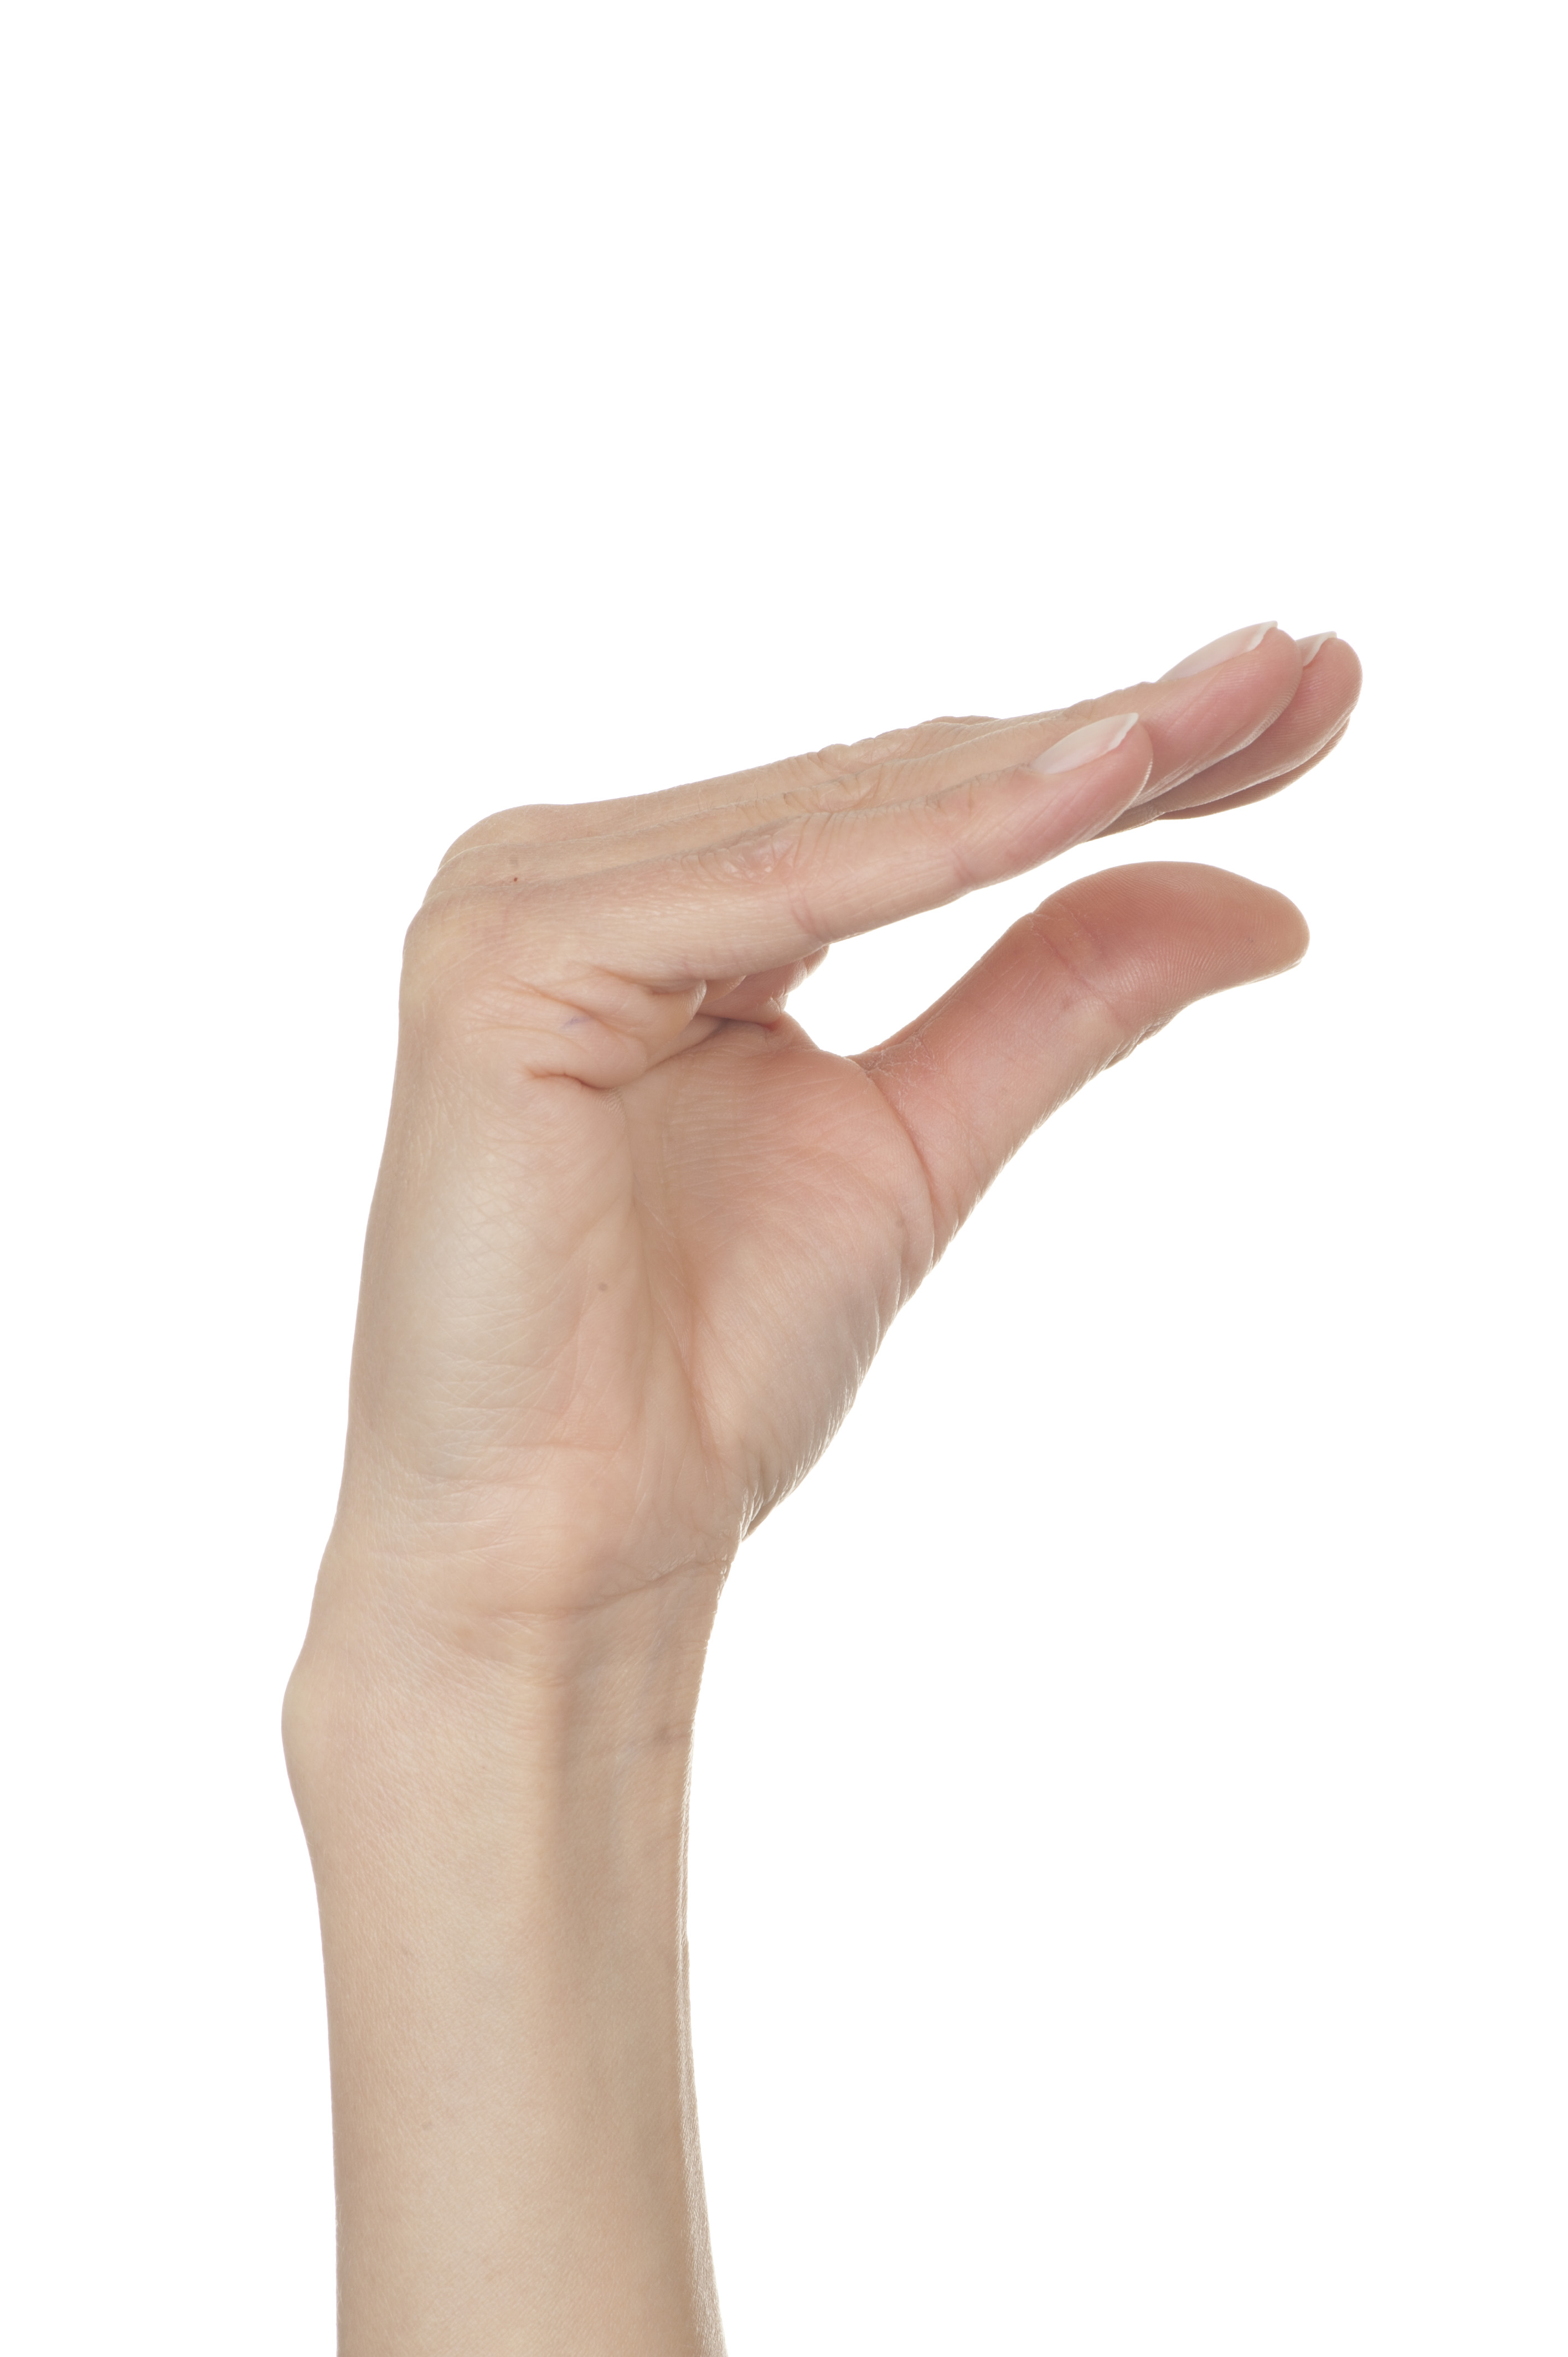 Keeping your fingers straight, slowly lower them towards your palm.